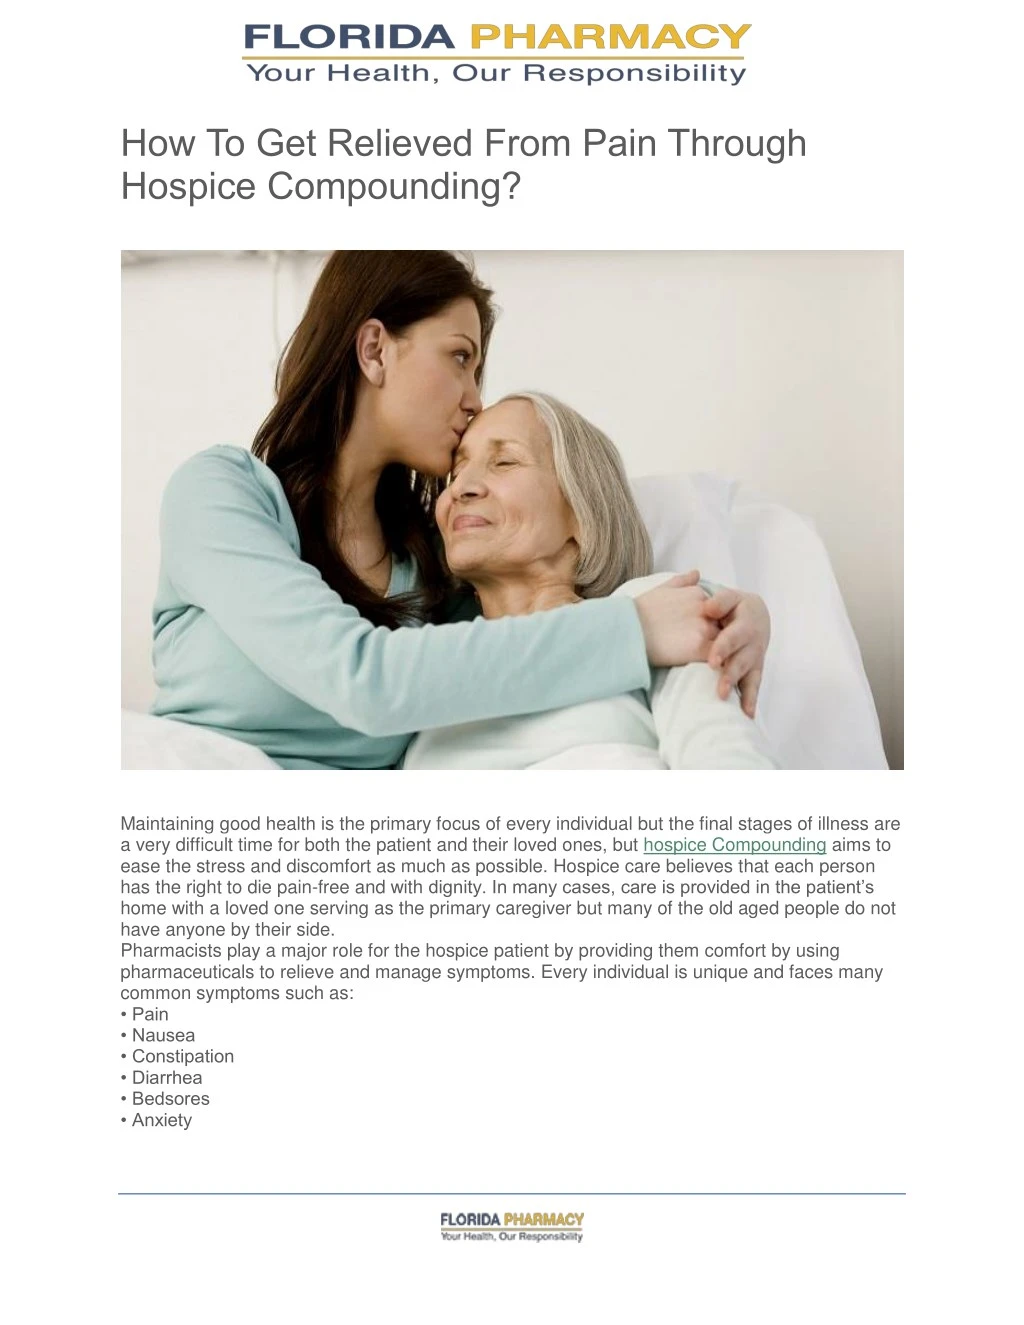 how to get relieved from pain through hospice